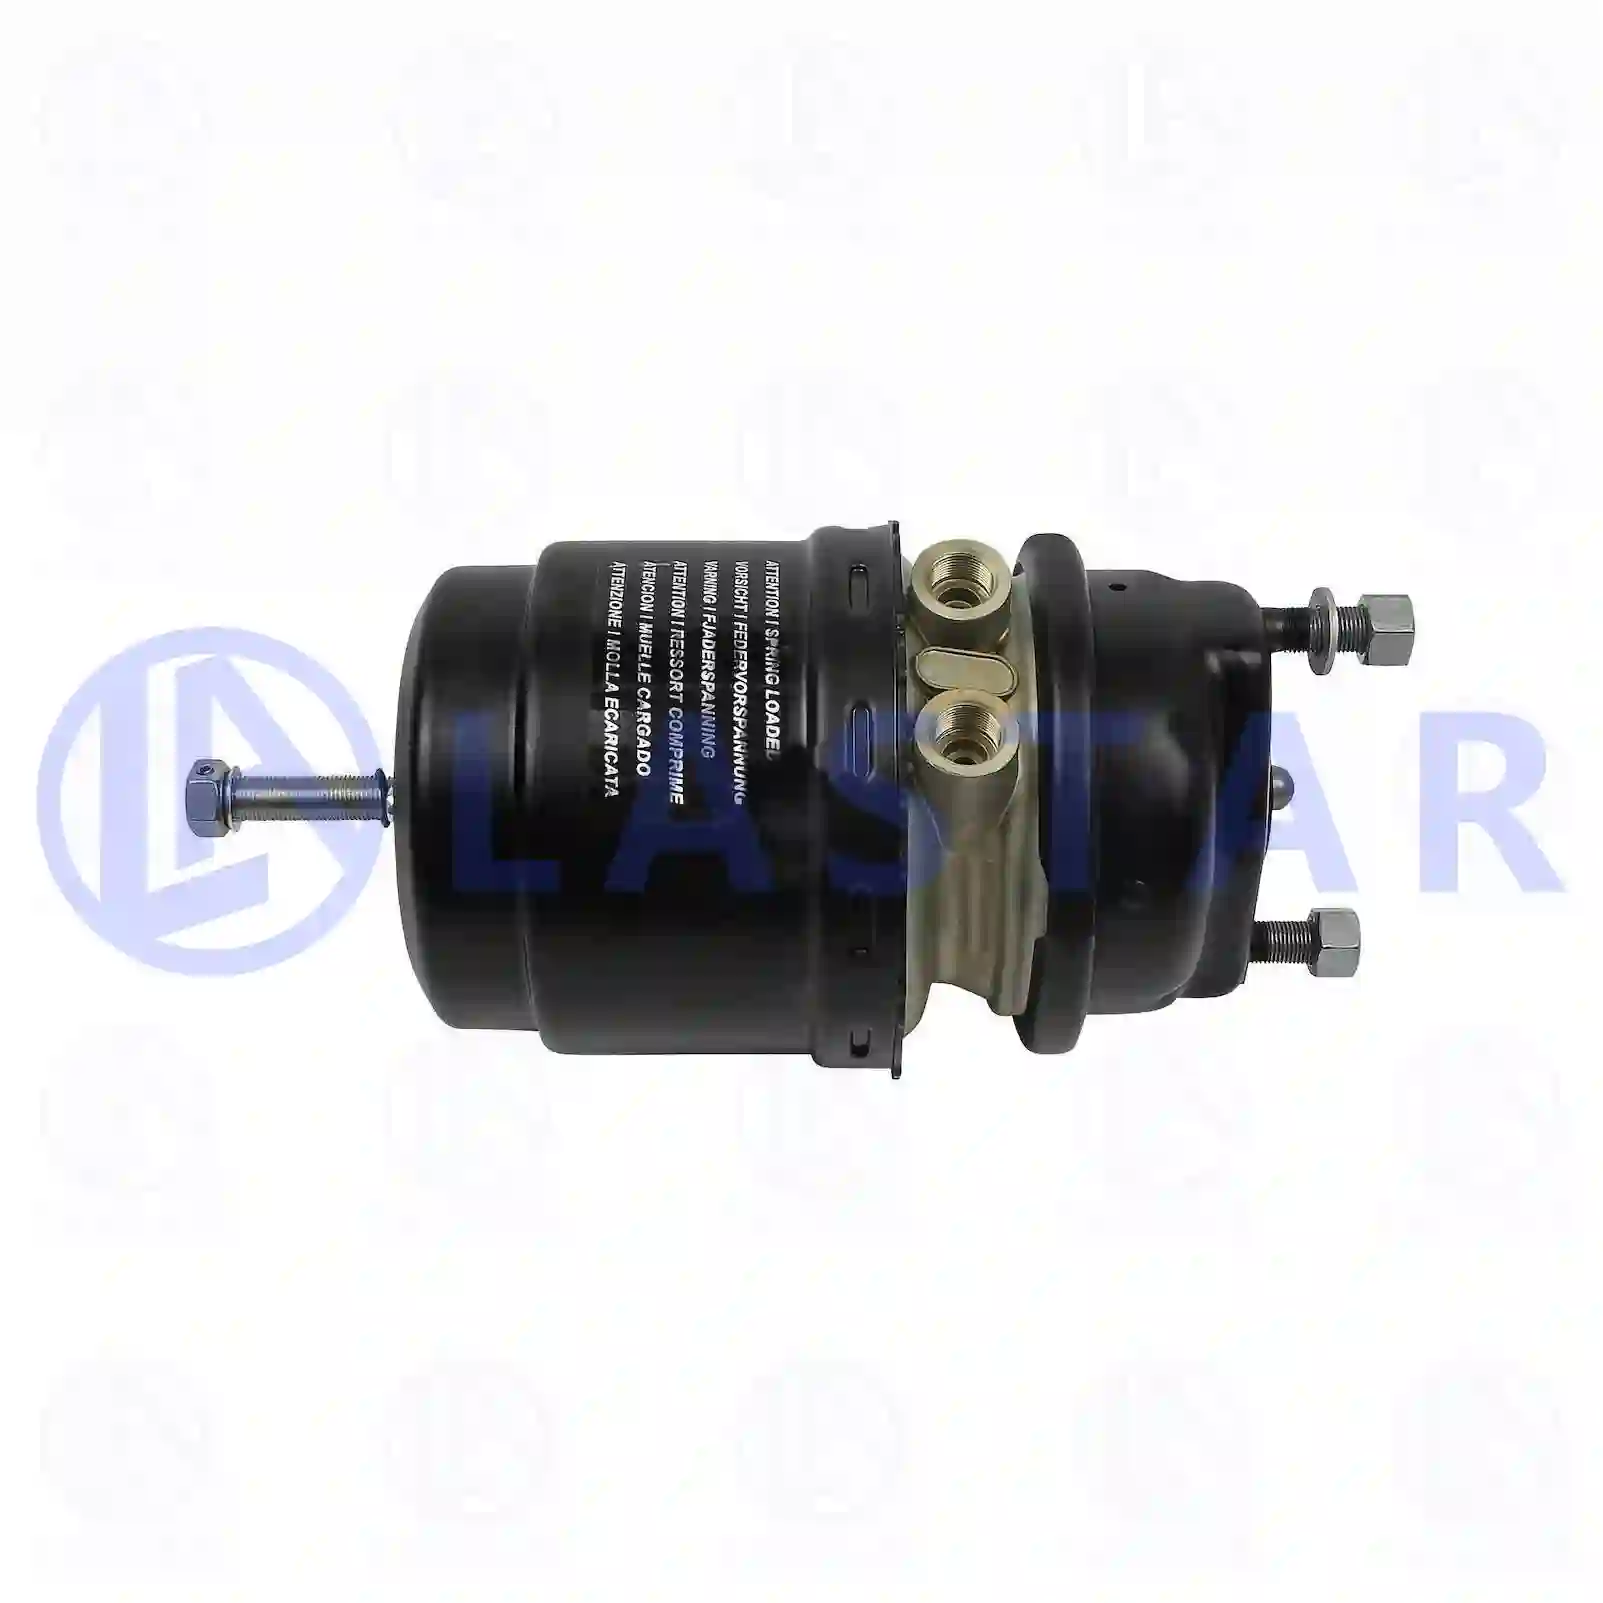 Spring brake cylinder, right, 77715212, 1519442, 0154204318, 0154204718, 0194205518, 0194206518, 0214209518, ZG50794-0008 ||  77715212 Lastar Spare Part | Truck Spare Parts, Auotomotive Spare Parts Spring brake cylinder, right, 77715212, 1519442, 0154204318, 0154204718, 0194205518, 0194206518, 0214209518, ZG50794-0008 ||  77715212 Lastar Spare Part | Truck Spare Parts, Auotomotive Spare Parts